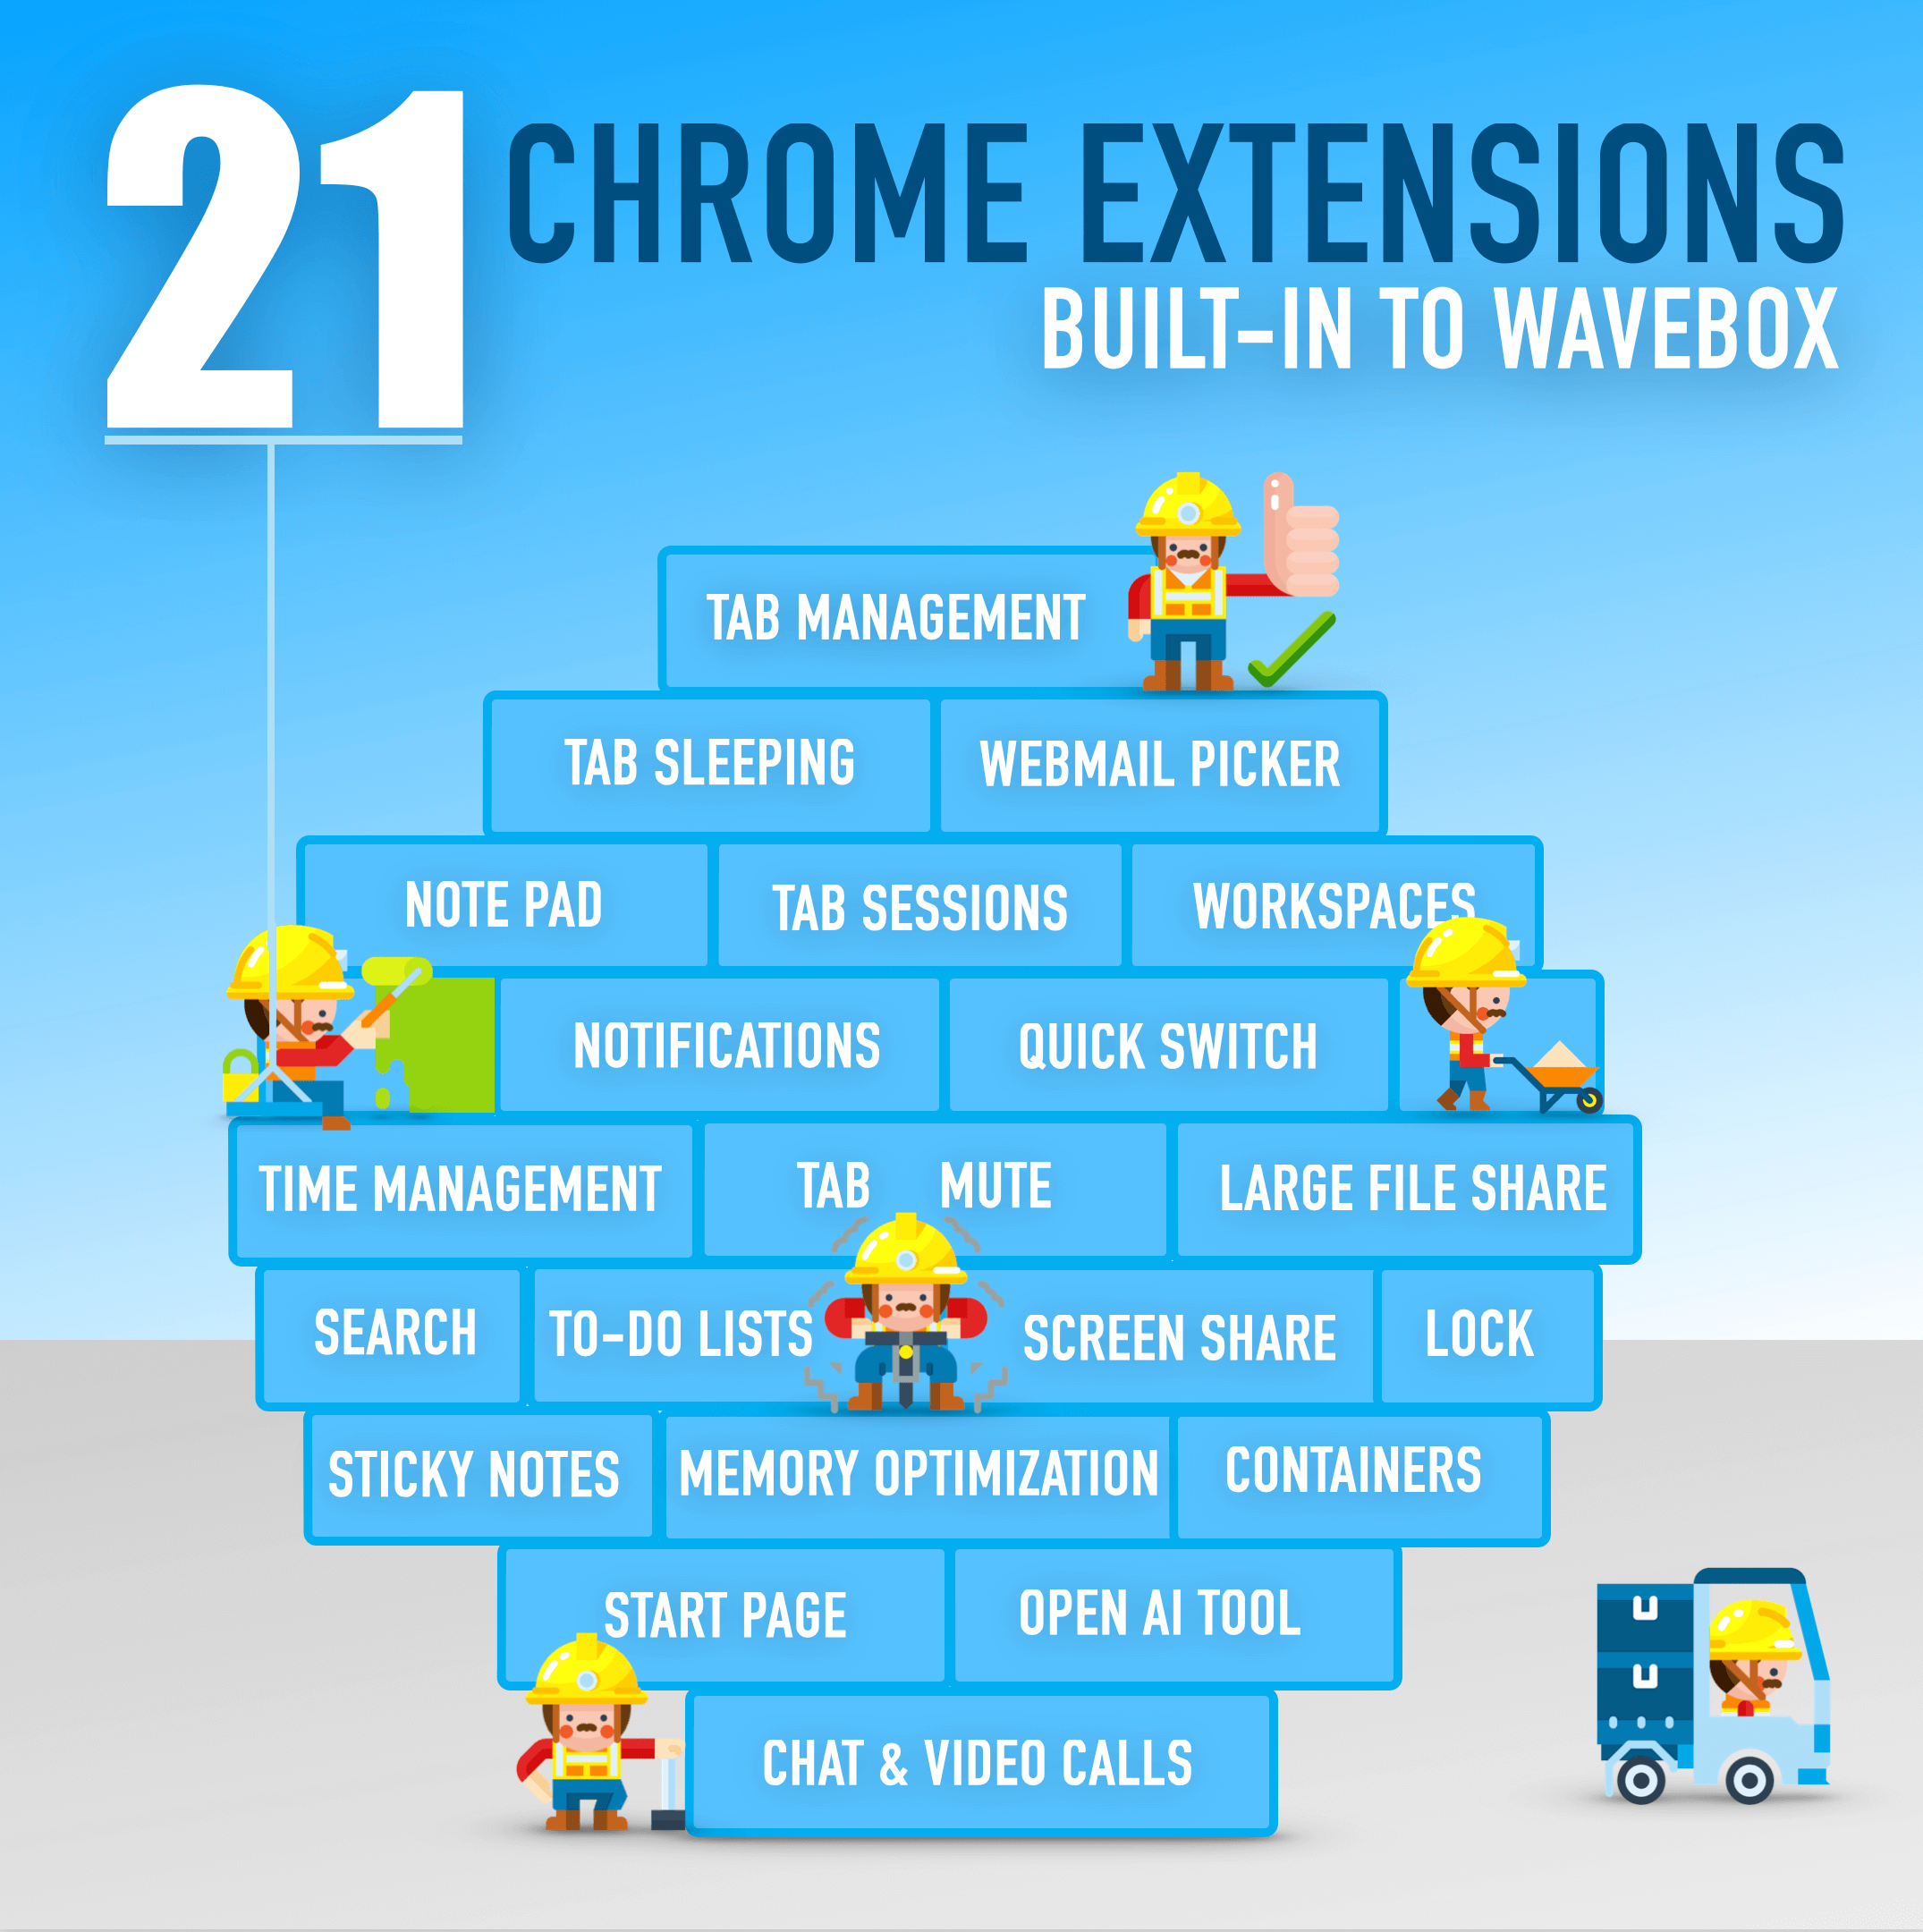 Discover 21 Chrome Extensions that are Built-in to Wavebox.